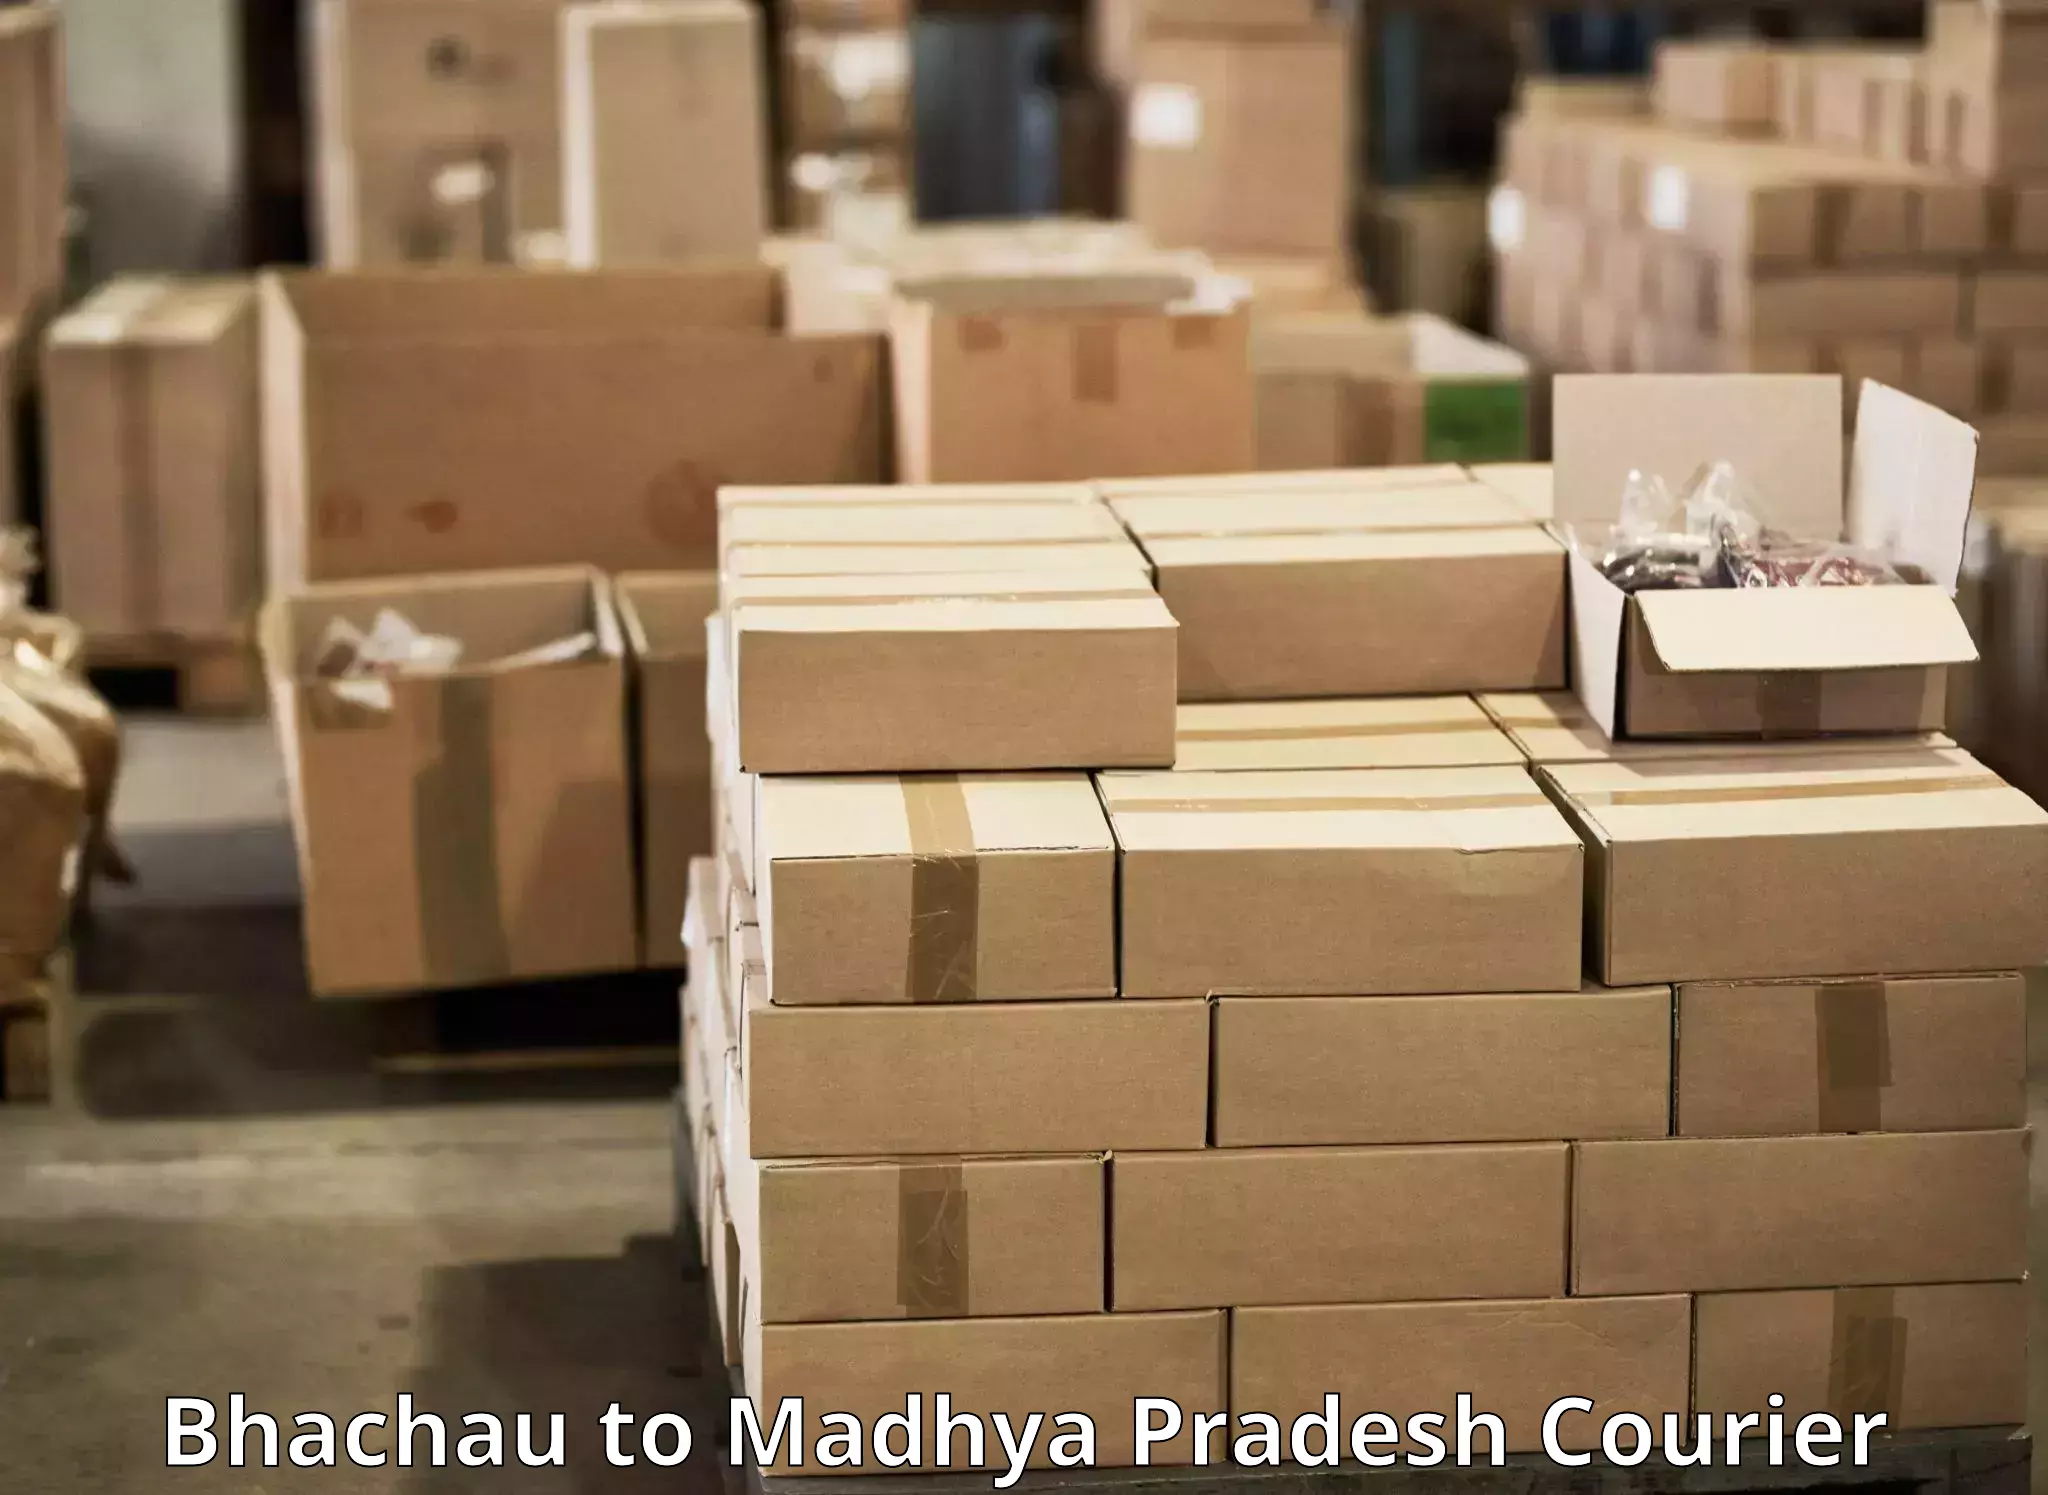 Nationwide shipping coverage Bhachau to Indore